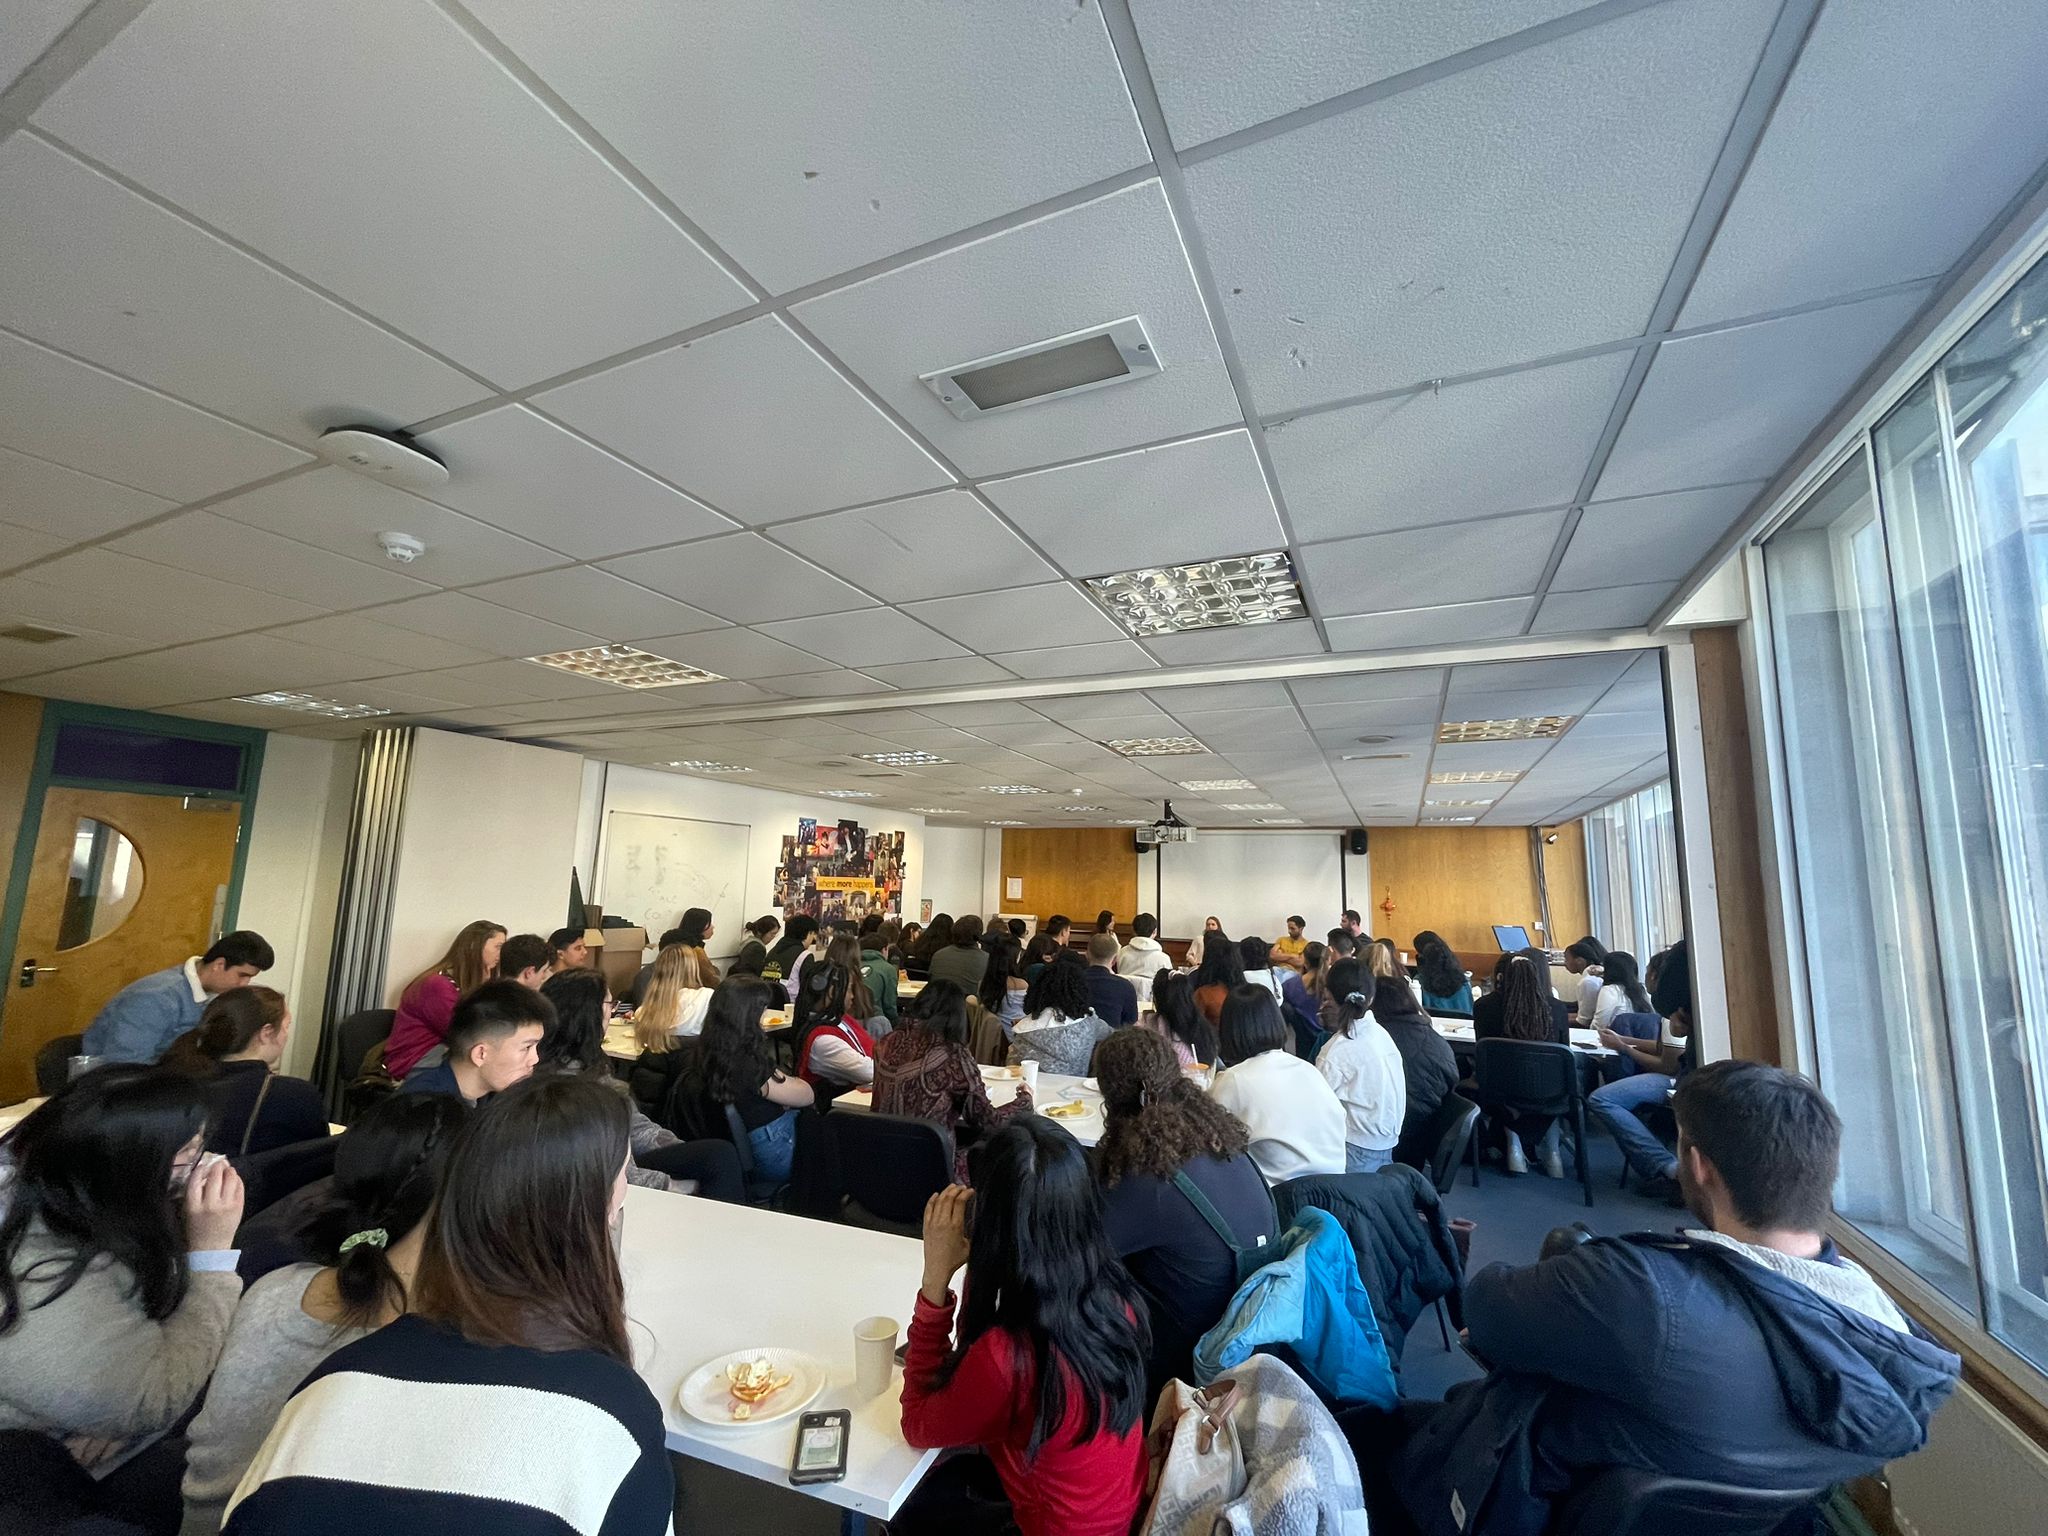 Room filled with people at a CU event